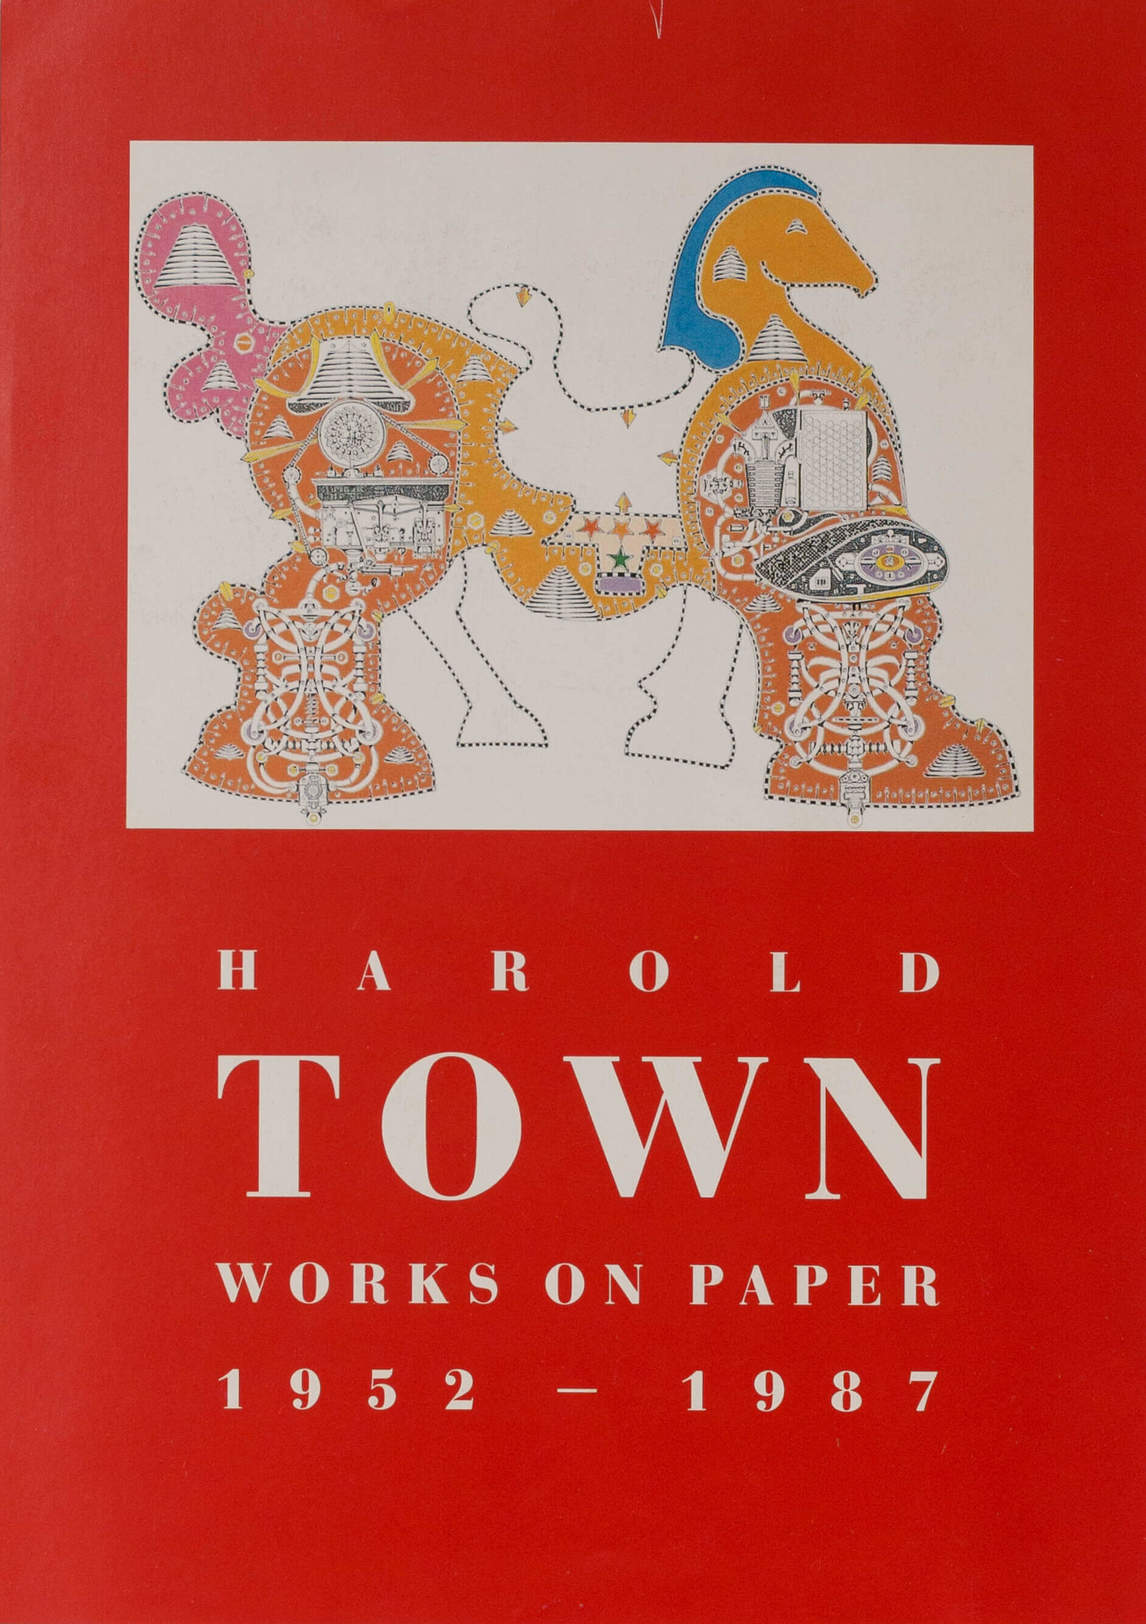 Art Canada Institute, Flyer for the 1987 exhibition Town: Works on Paper, 1952–1987 at the Canada House Cultural Centre Gallery, London, England